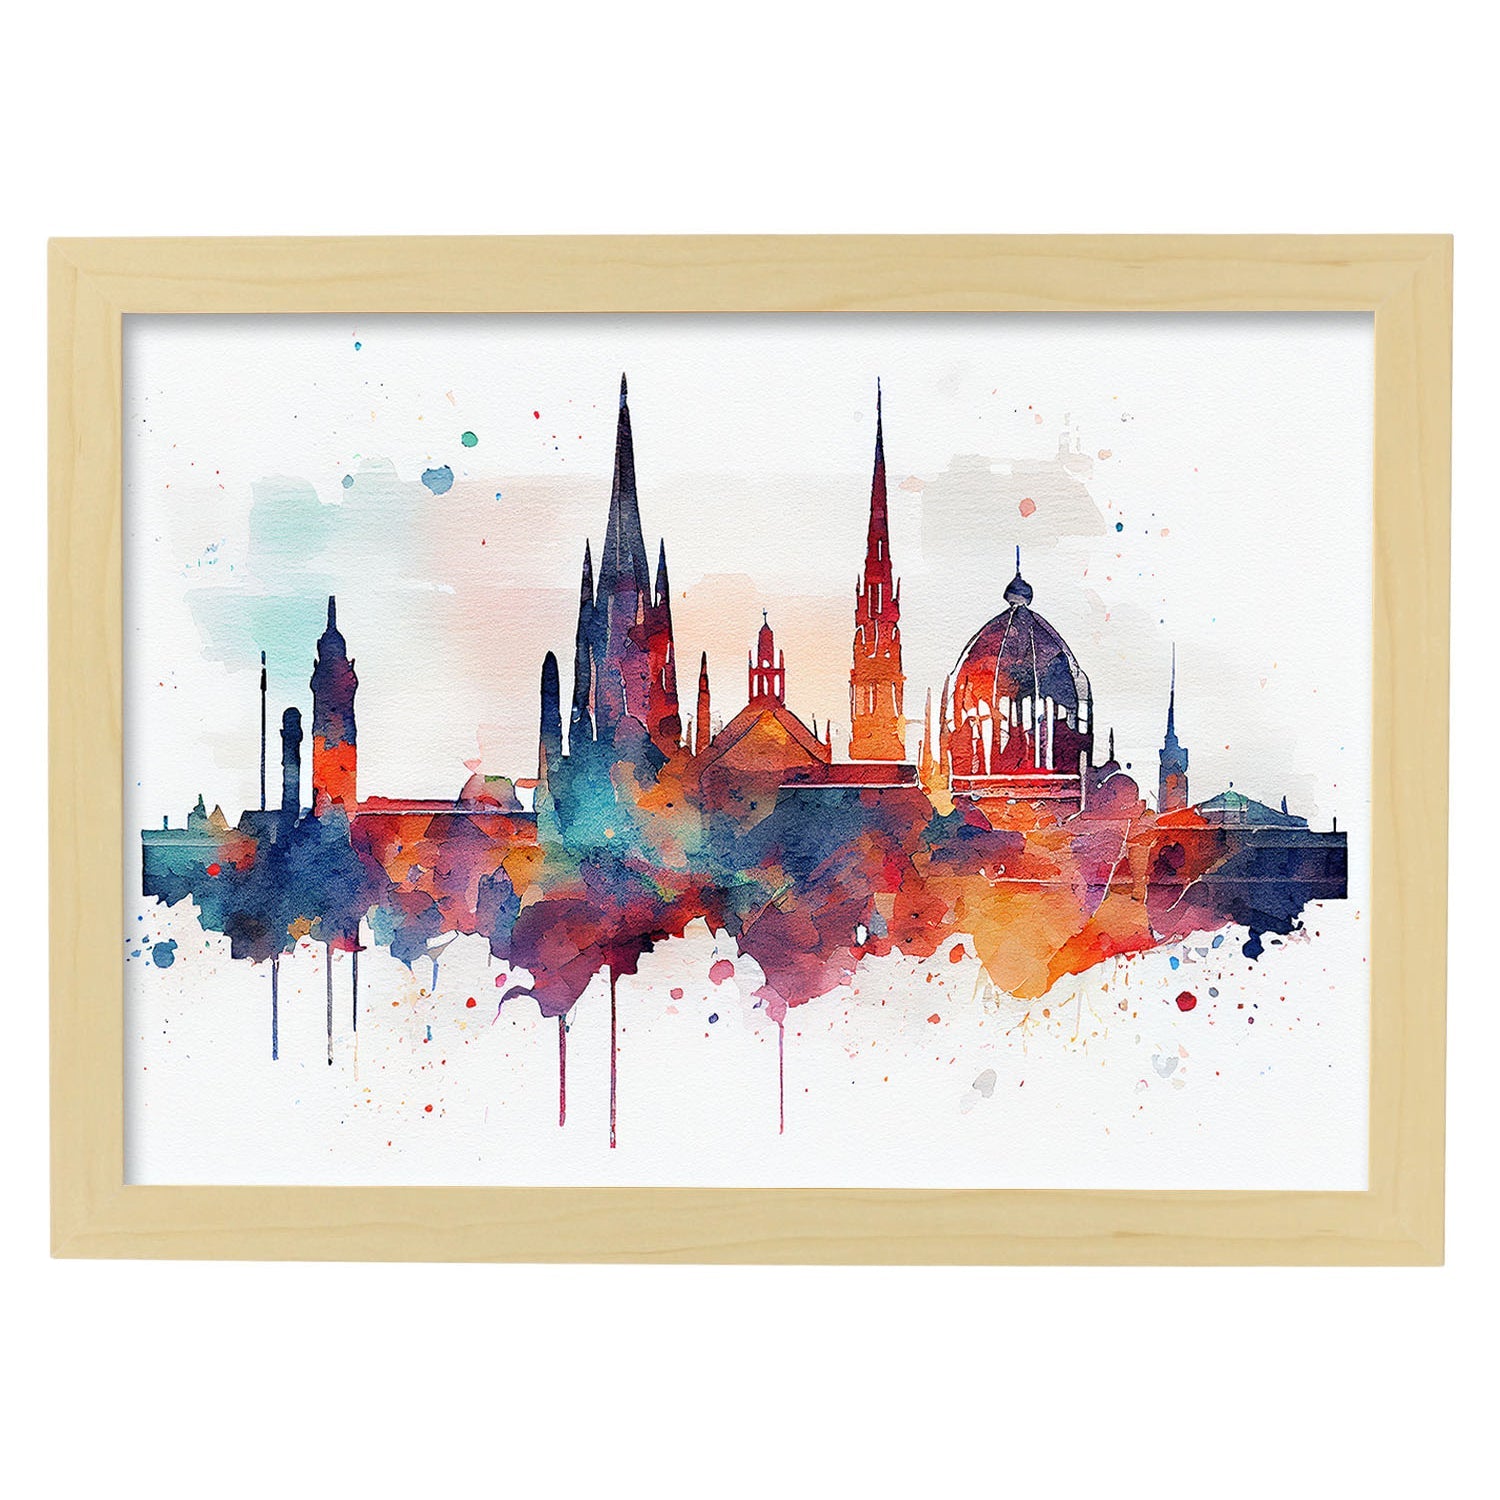 Nacnic watercolor of a skyline of the city of Vienna_2. Aesthetic Wall Art Prints for Bedroom or Living Room Design.-Artwork-Nacnic-A4-Marco Madera Clara-Nacnic Estudio SL